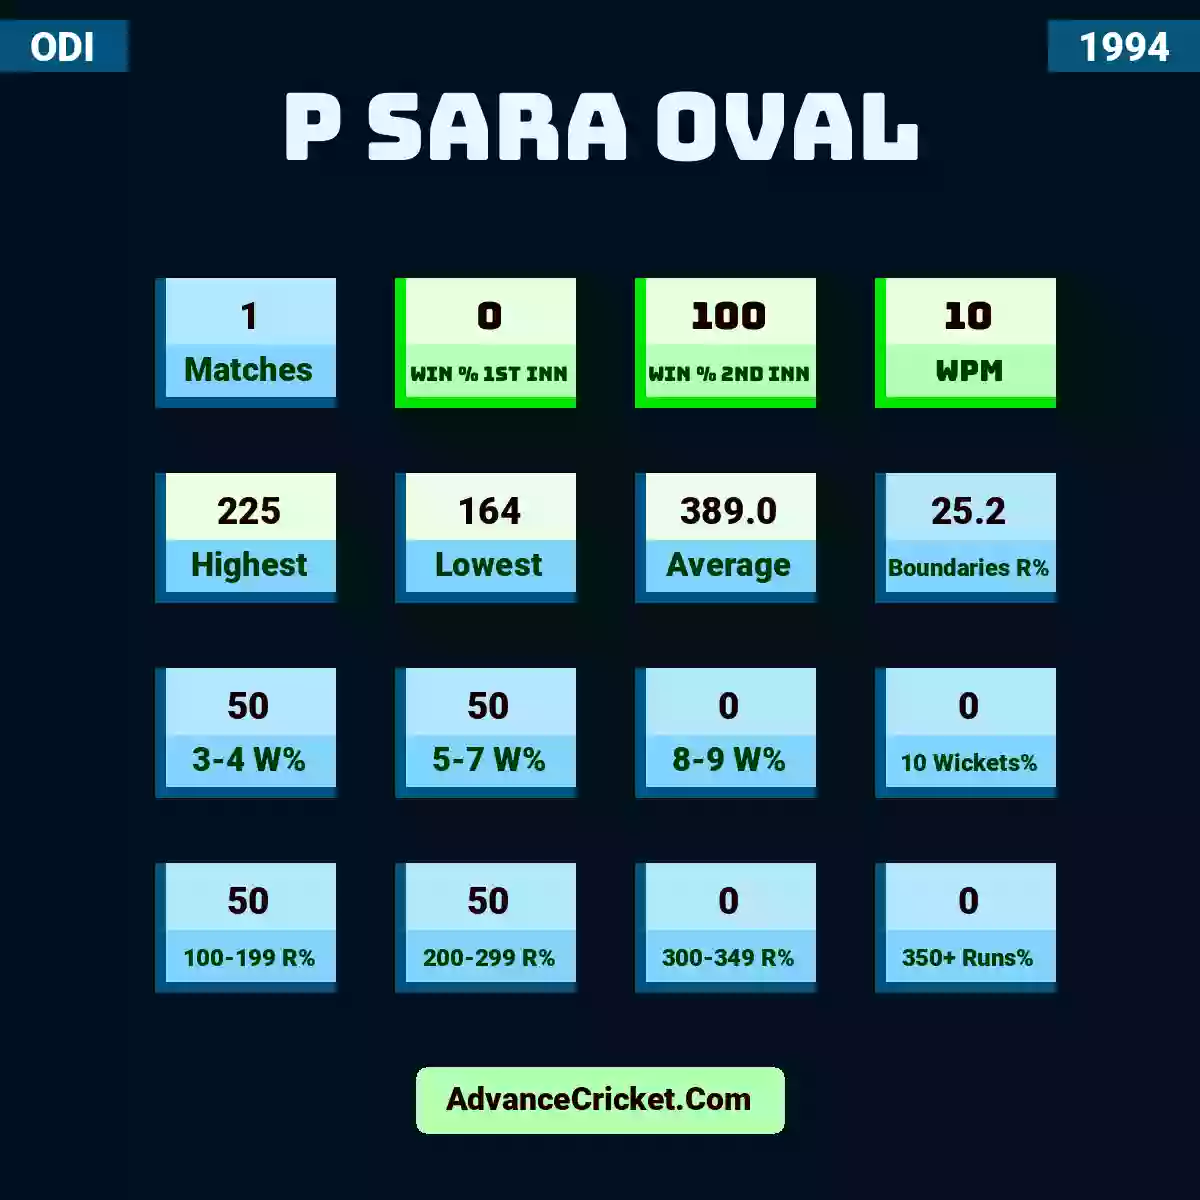 Image showing P Sara Oval with Matches: 1, Win % 1st Inn: 0, Win % 2nd Inn: 100, WPM: 10, Highest: 225, Lowest: 164, Average: 389.0, Boundaries R%: 25.2, 3-4 W%: 50, 5-7 W%: 50, 8-9 W%: 0, 10 Wickets%: 0, 100-199 R%: 50, 200-299 R%: 50, 300-349 R%: 0, 350+ Runs%: 0.